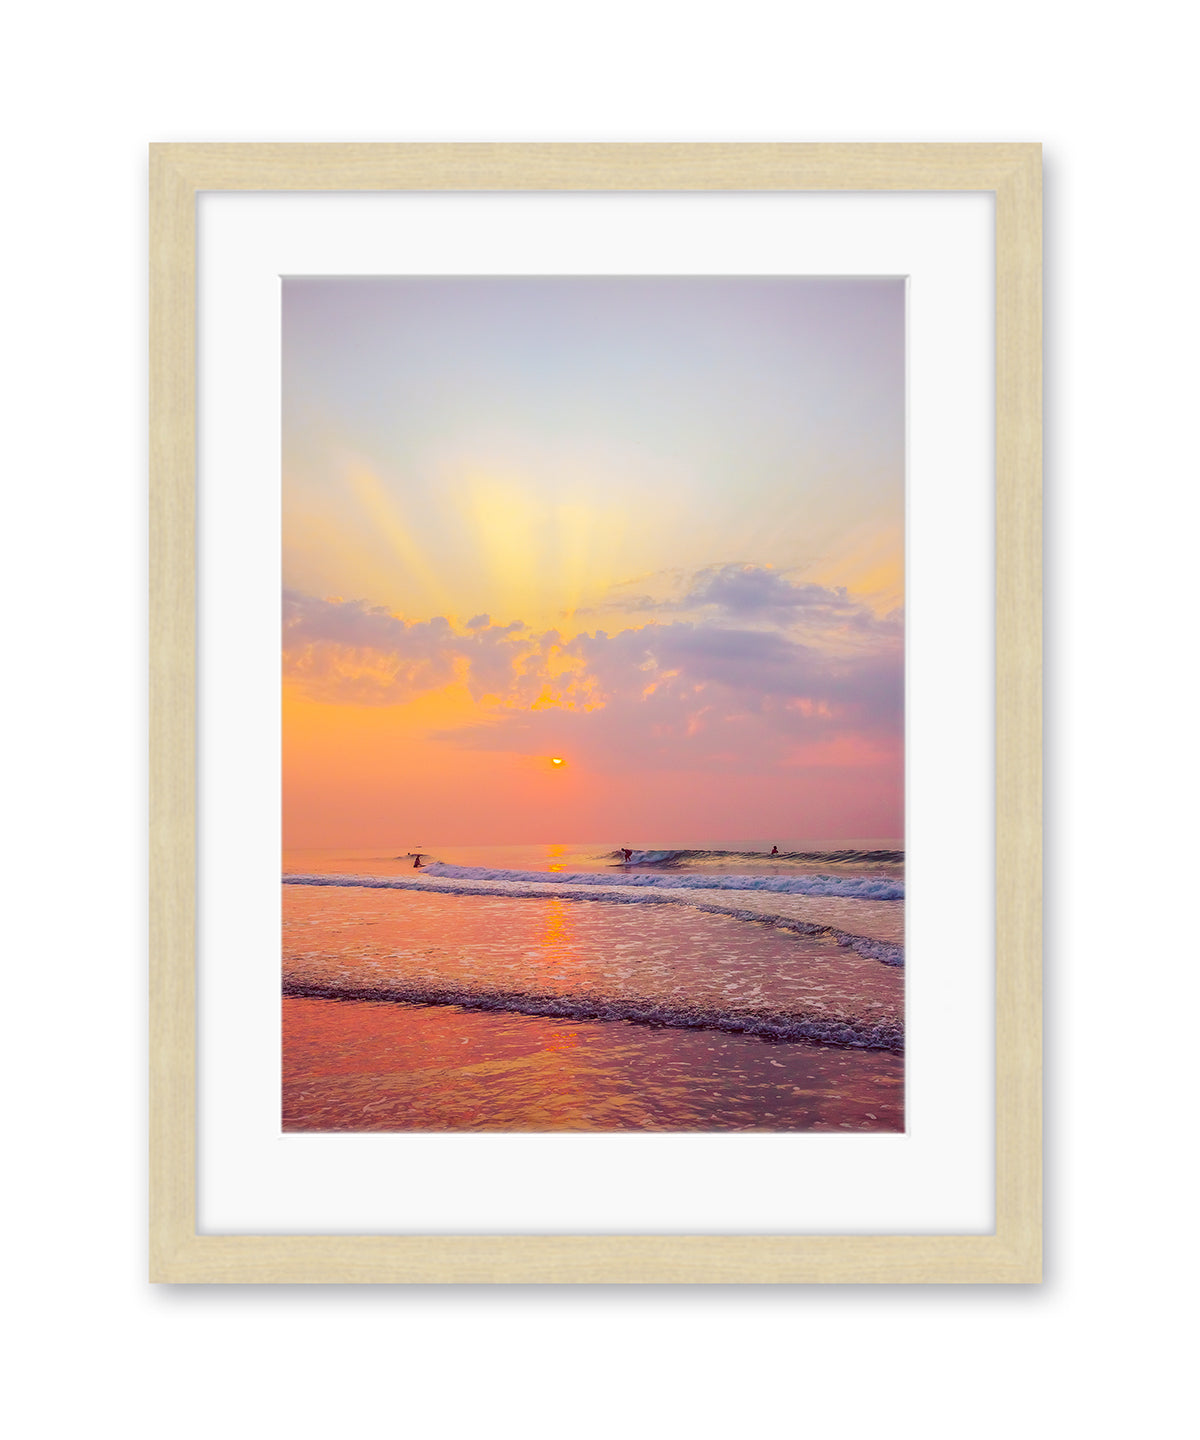 colorful sunrise wrightsville beach photograph, wood frame